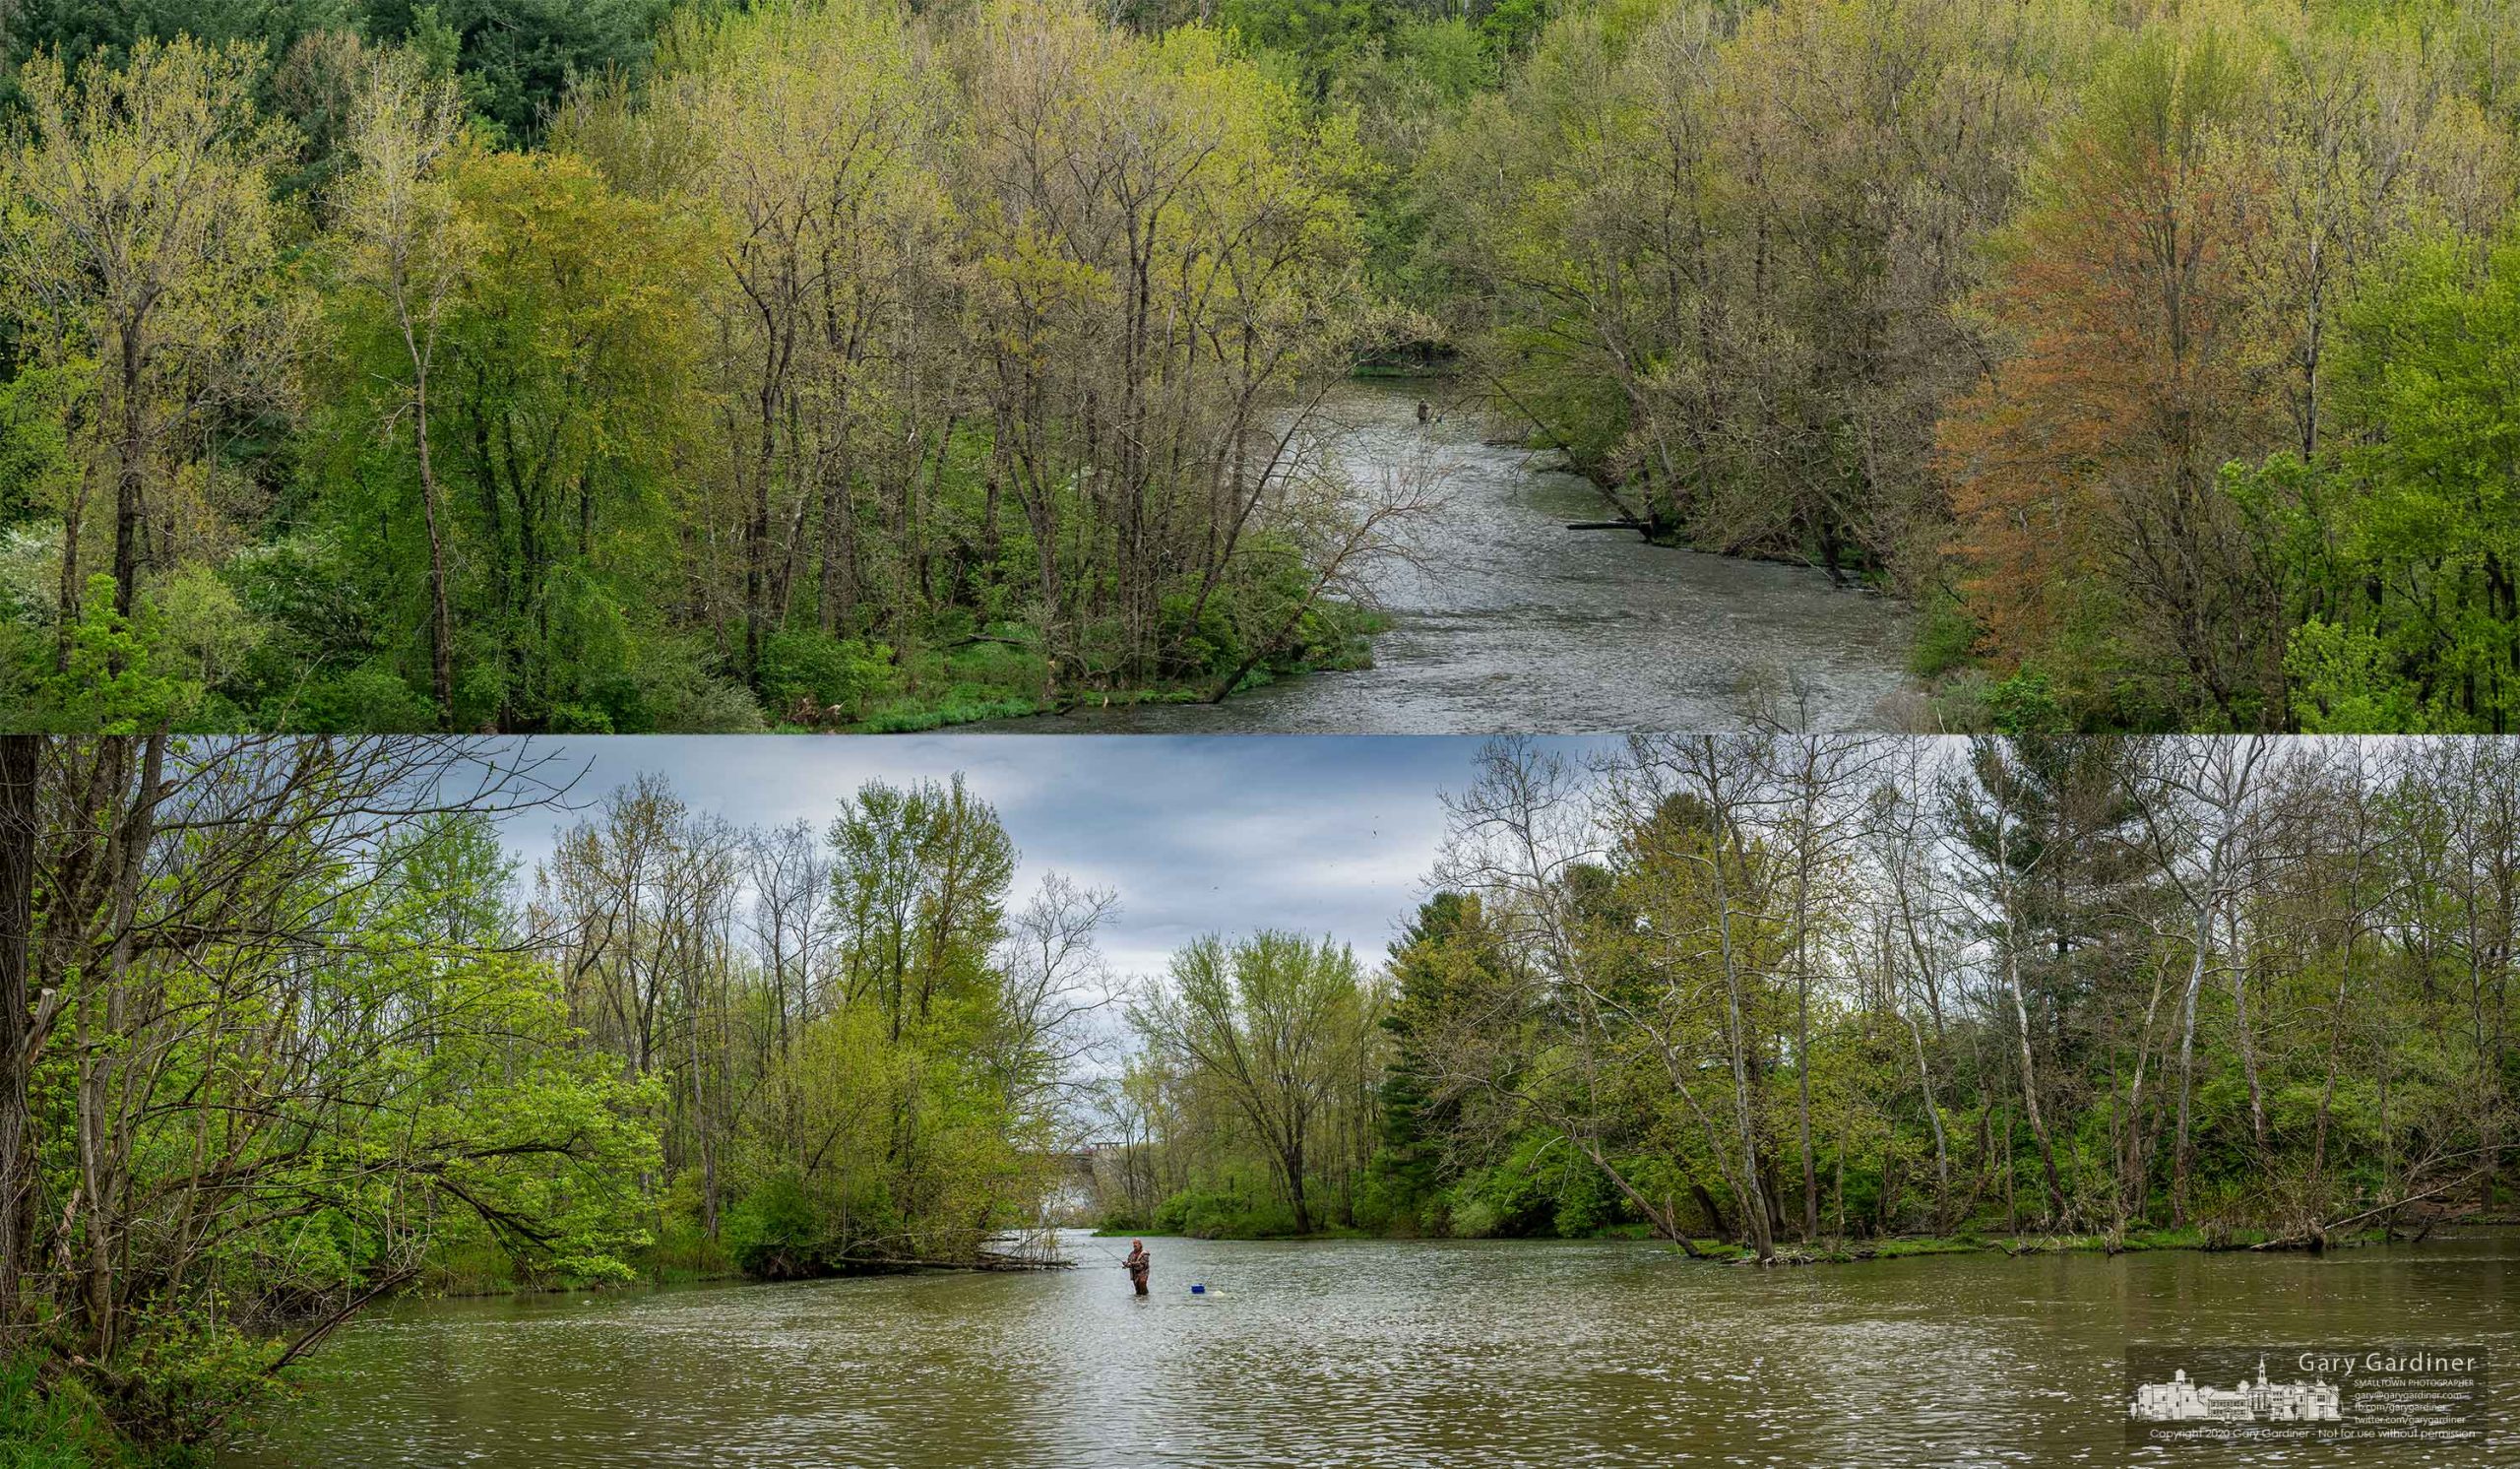 A fisherman works his lures in the center of Big Walnut Creek as seen from Hoover Dam and the shoreline south of the dam. My Final Photo for May 5, 2020.